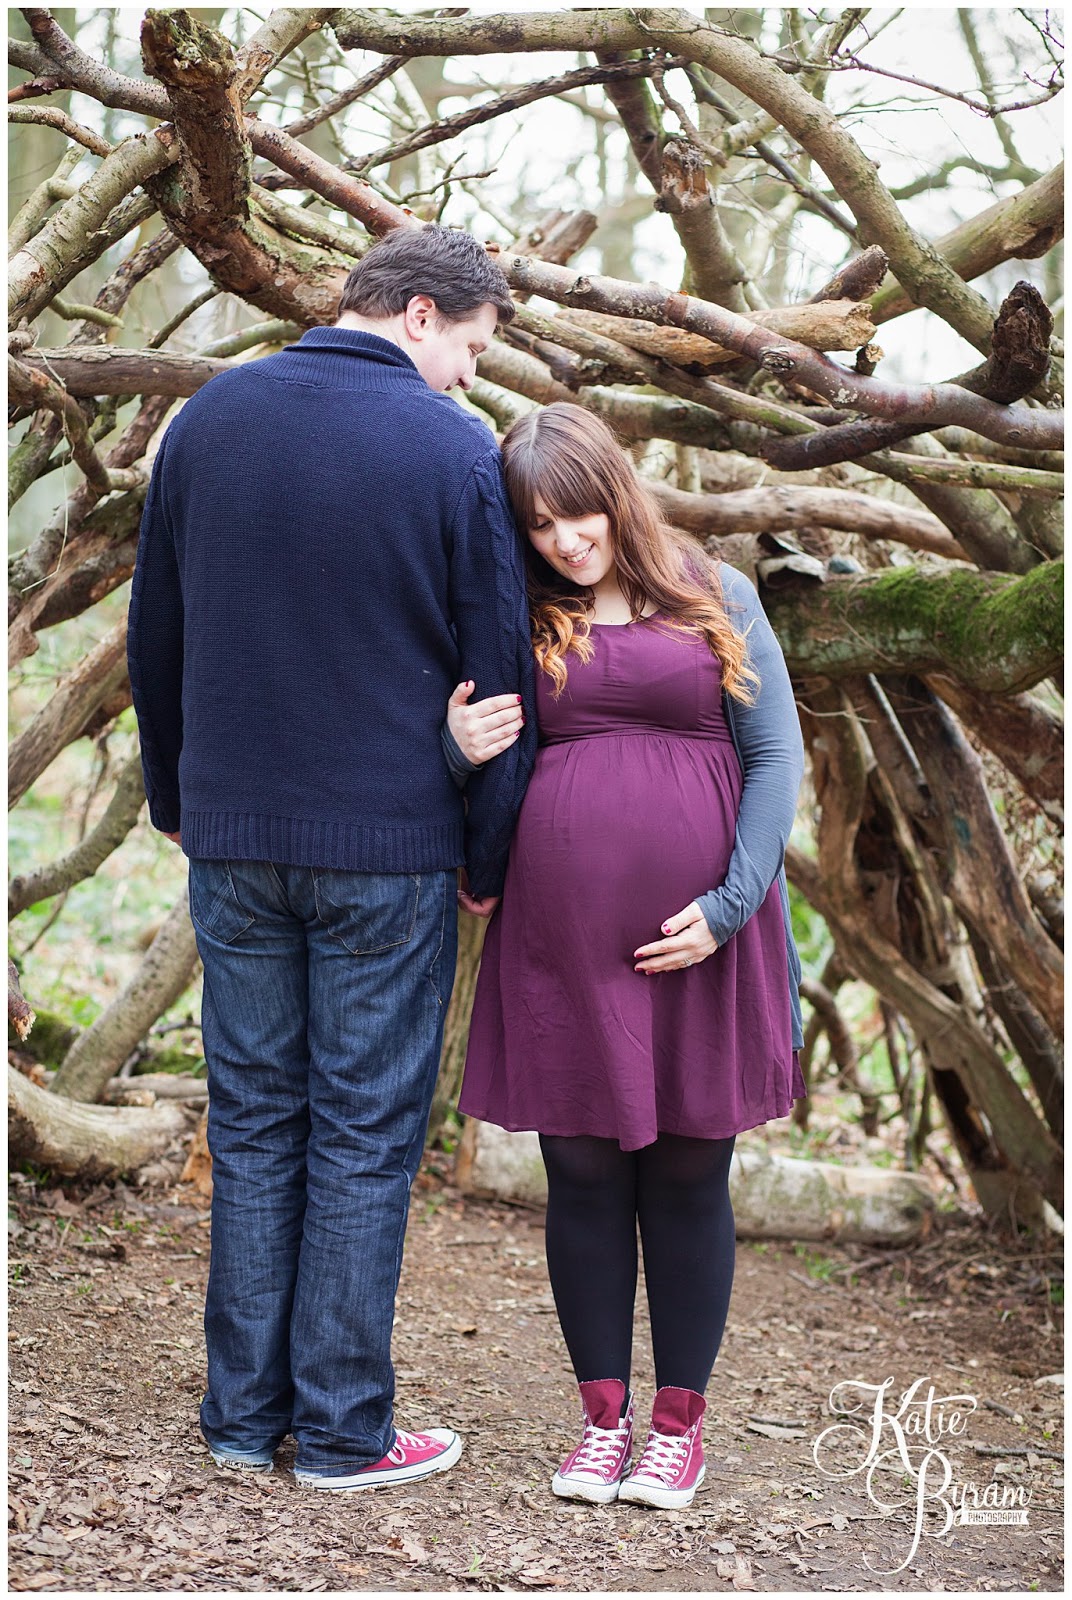 maternity photoshoot, maternity photos, northumberland photoshoot, maternity photography, katie byram photography, woodland maternity shoot, converse, mum and dad to be, coming soon, pregnancy photographs